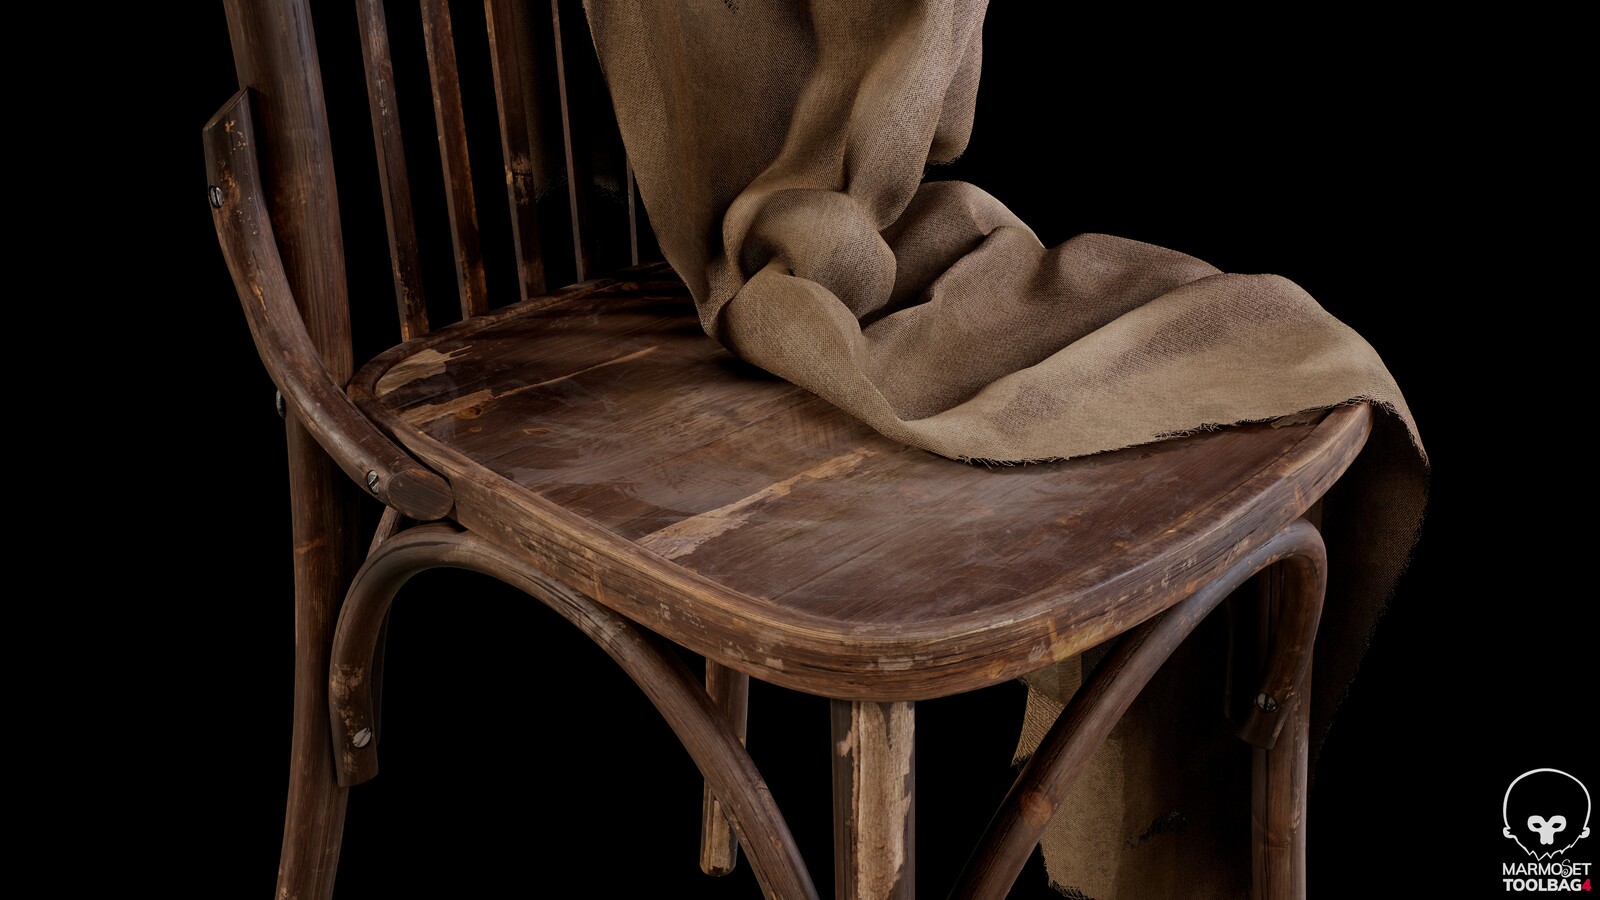 Old chair study